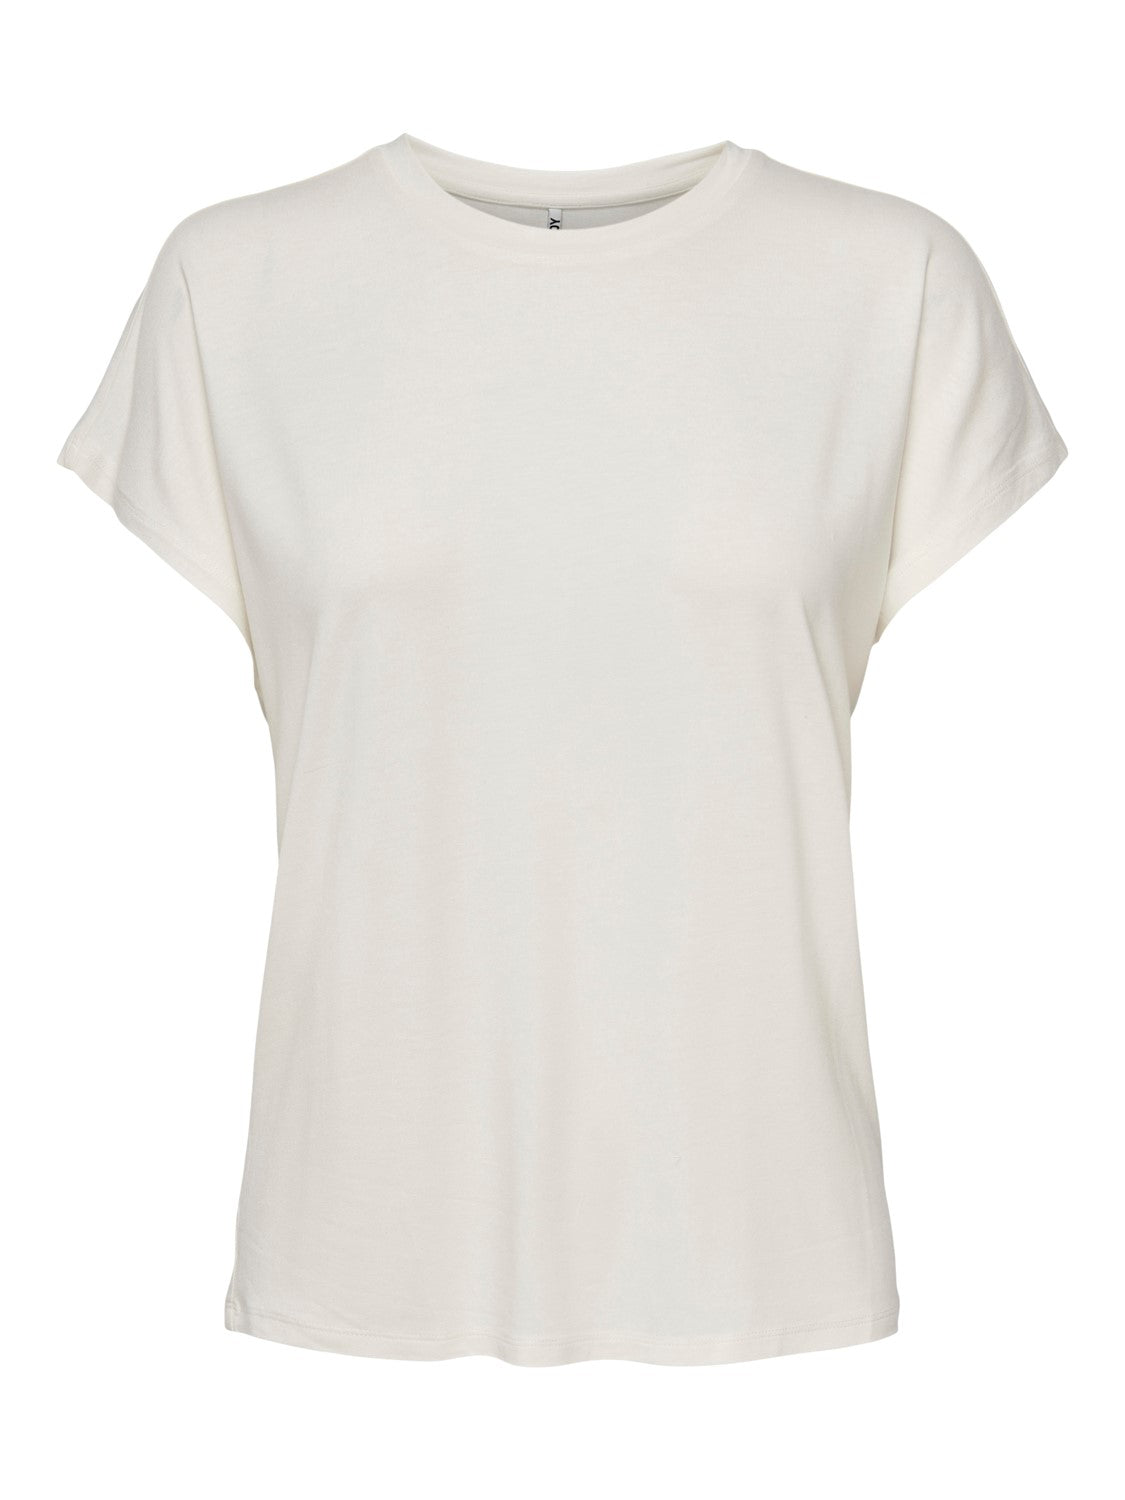 JDYNELLY S/S O-neck Top